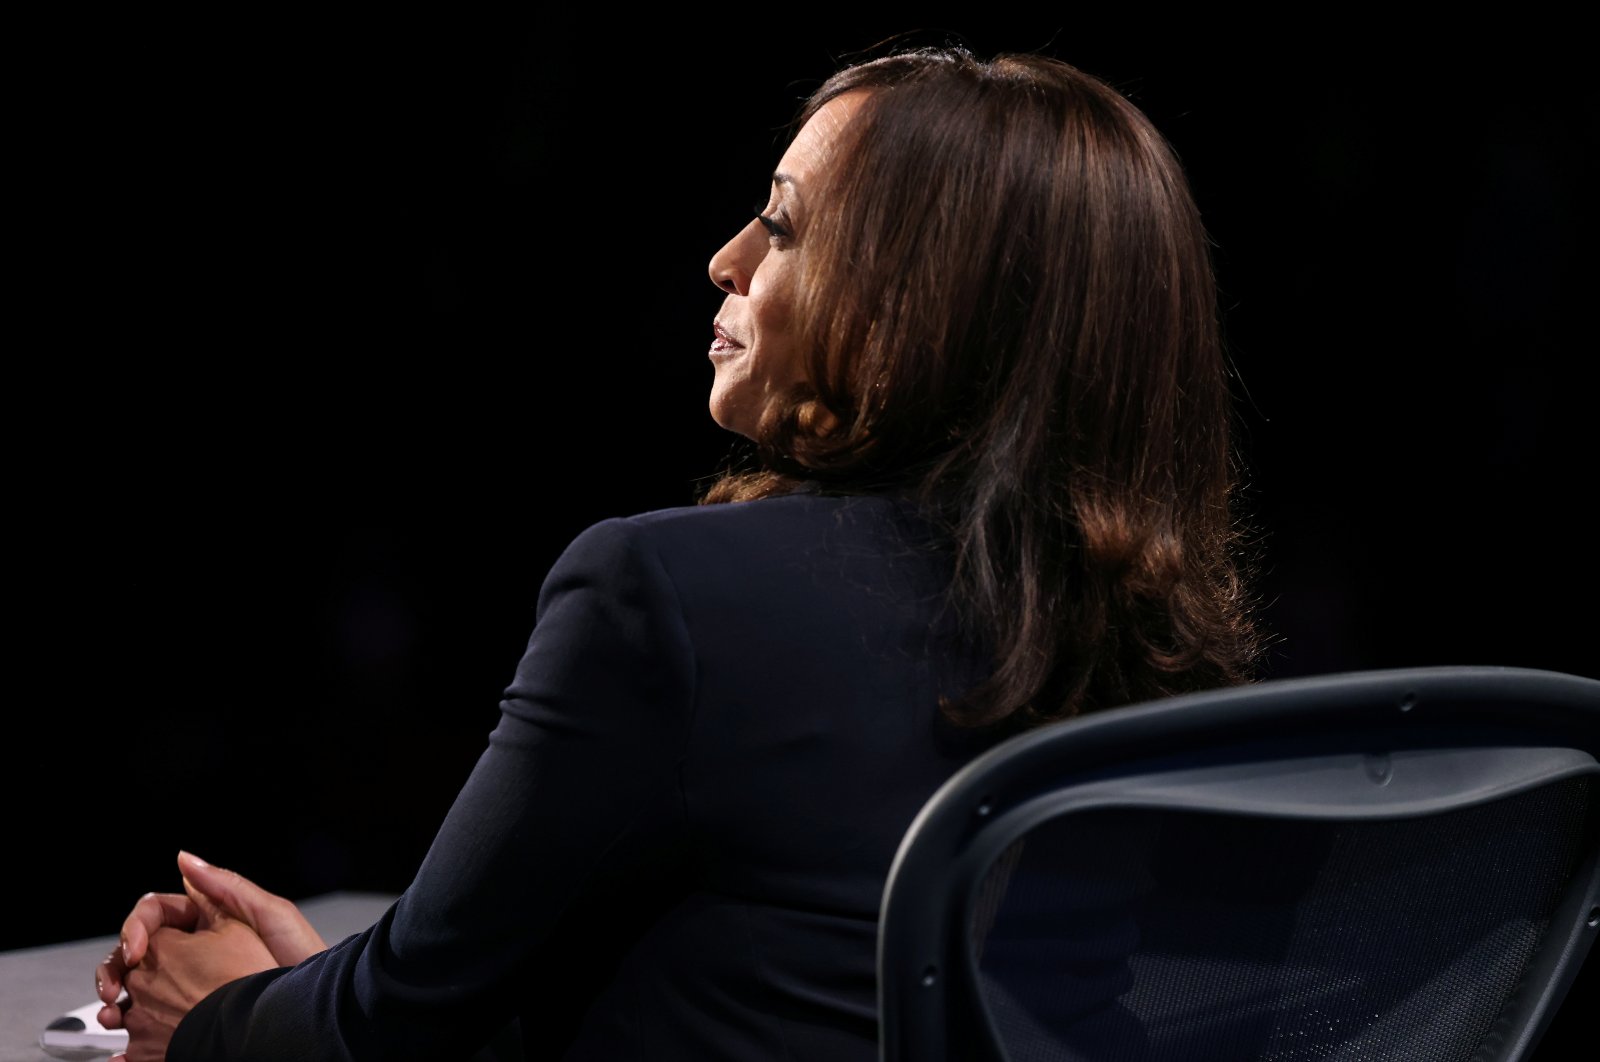 Democratic vice presidential nominee and U.S. Senator Kamala Harris takes part in the 2020 vice presidential debate with U.S. Vice President Mike Pence (not pictured) on the campus of the University of Utah in Salt Lake City, Utah, U.S., Oct. 7, 2020. (Reuters Photo)